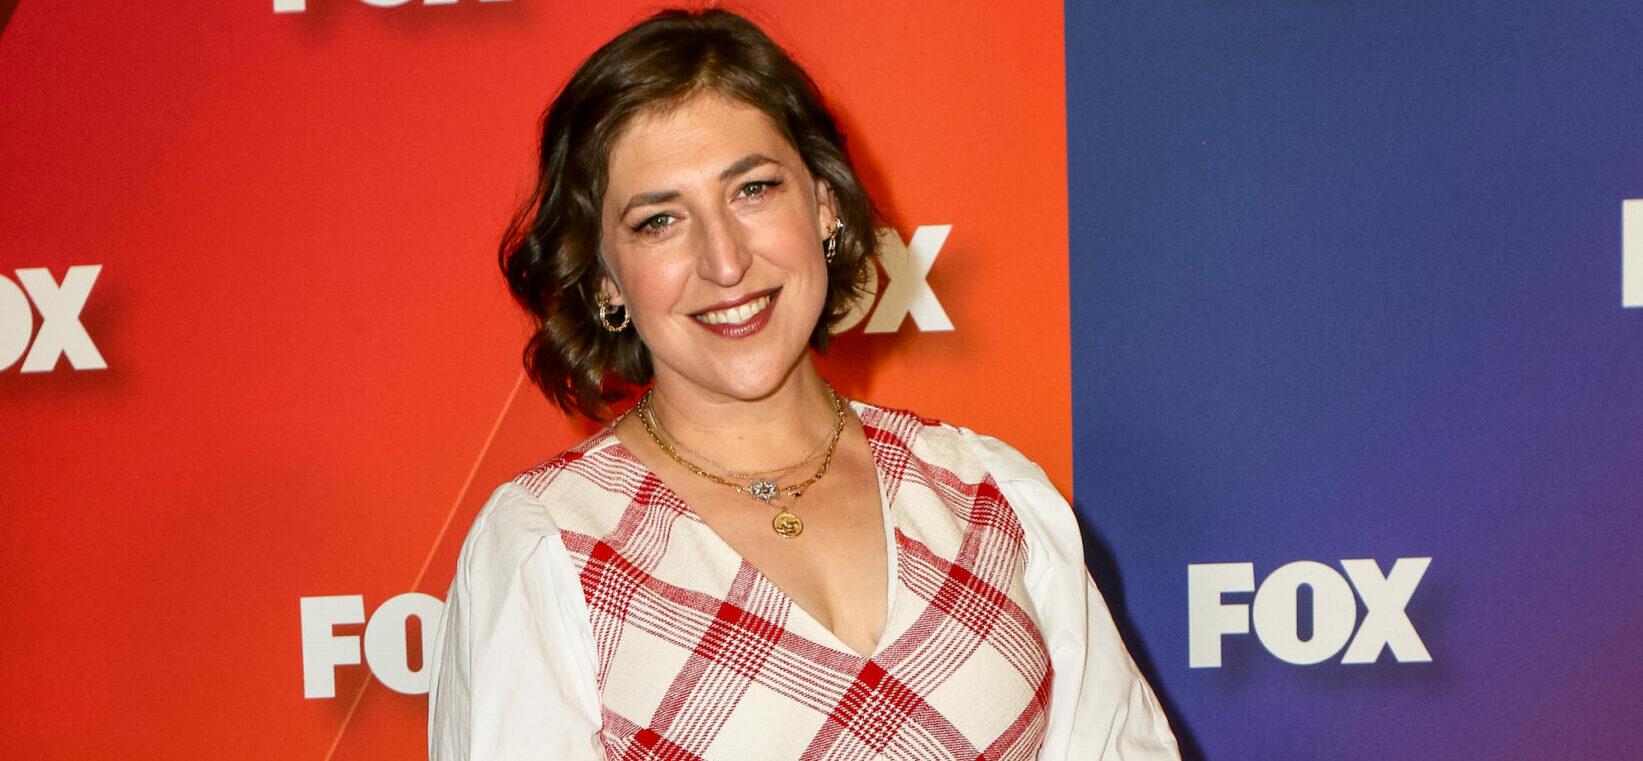 Mayim Bialik No Longer The Host Of ‘Jeopardy!’